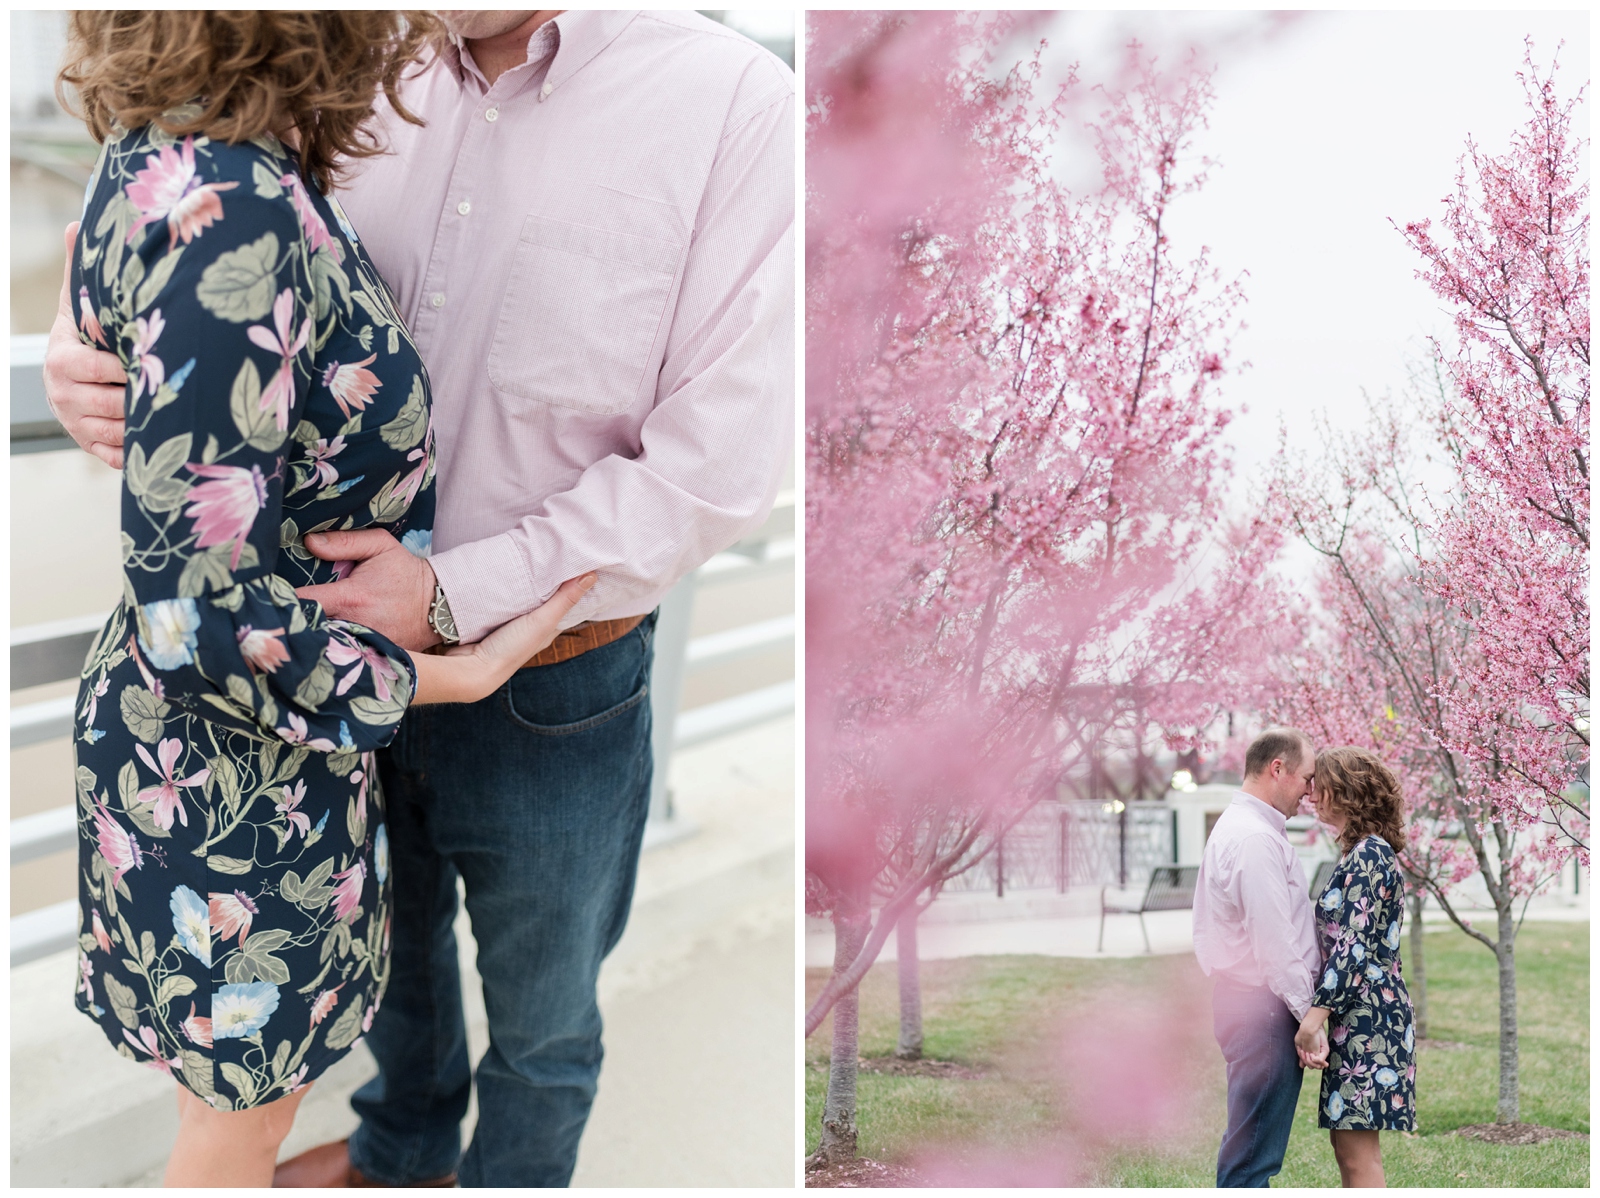 a happily engaged couple embraces each other on a town street bridge with redbuds trees blooming in spring 